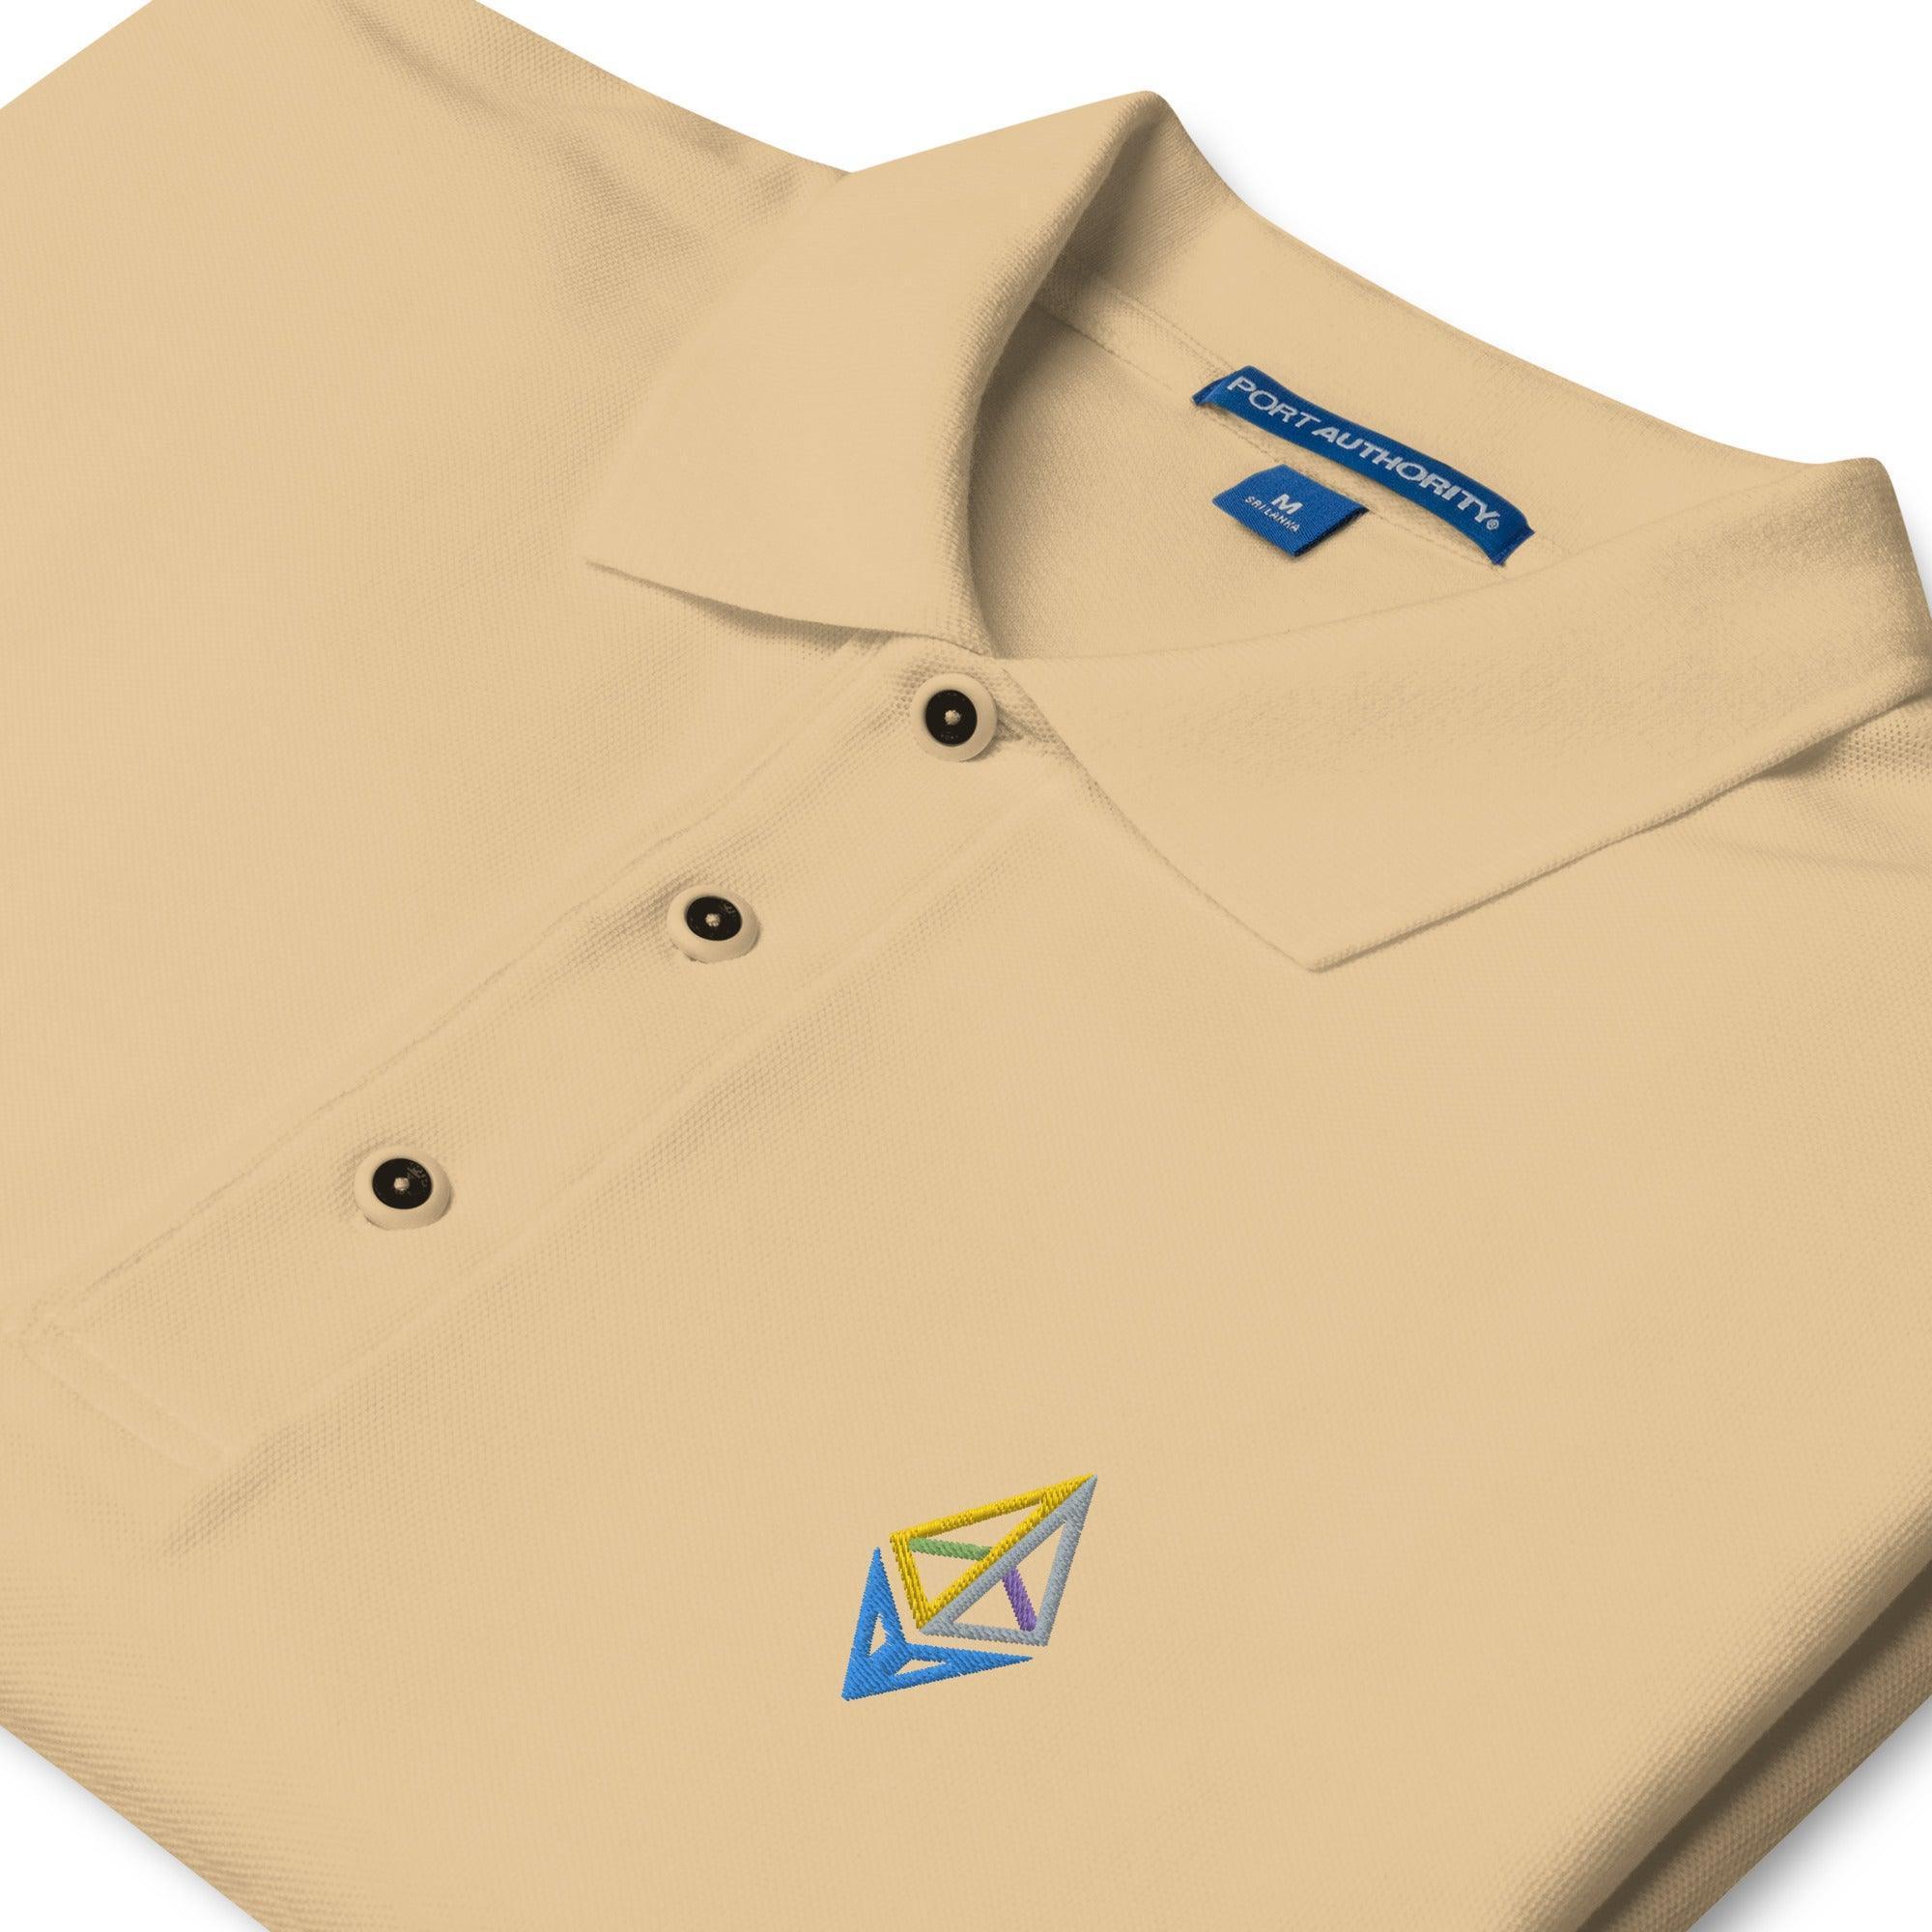 Ethereum Colorful Polo Shirt - InvestmenTees